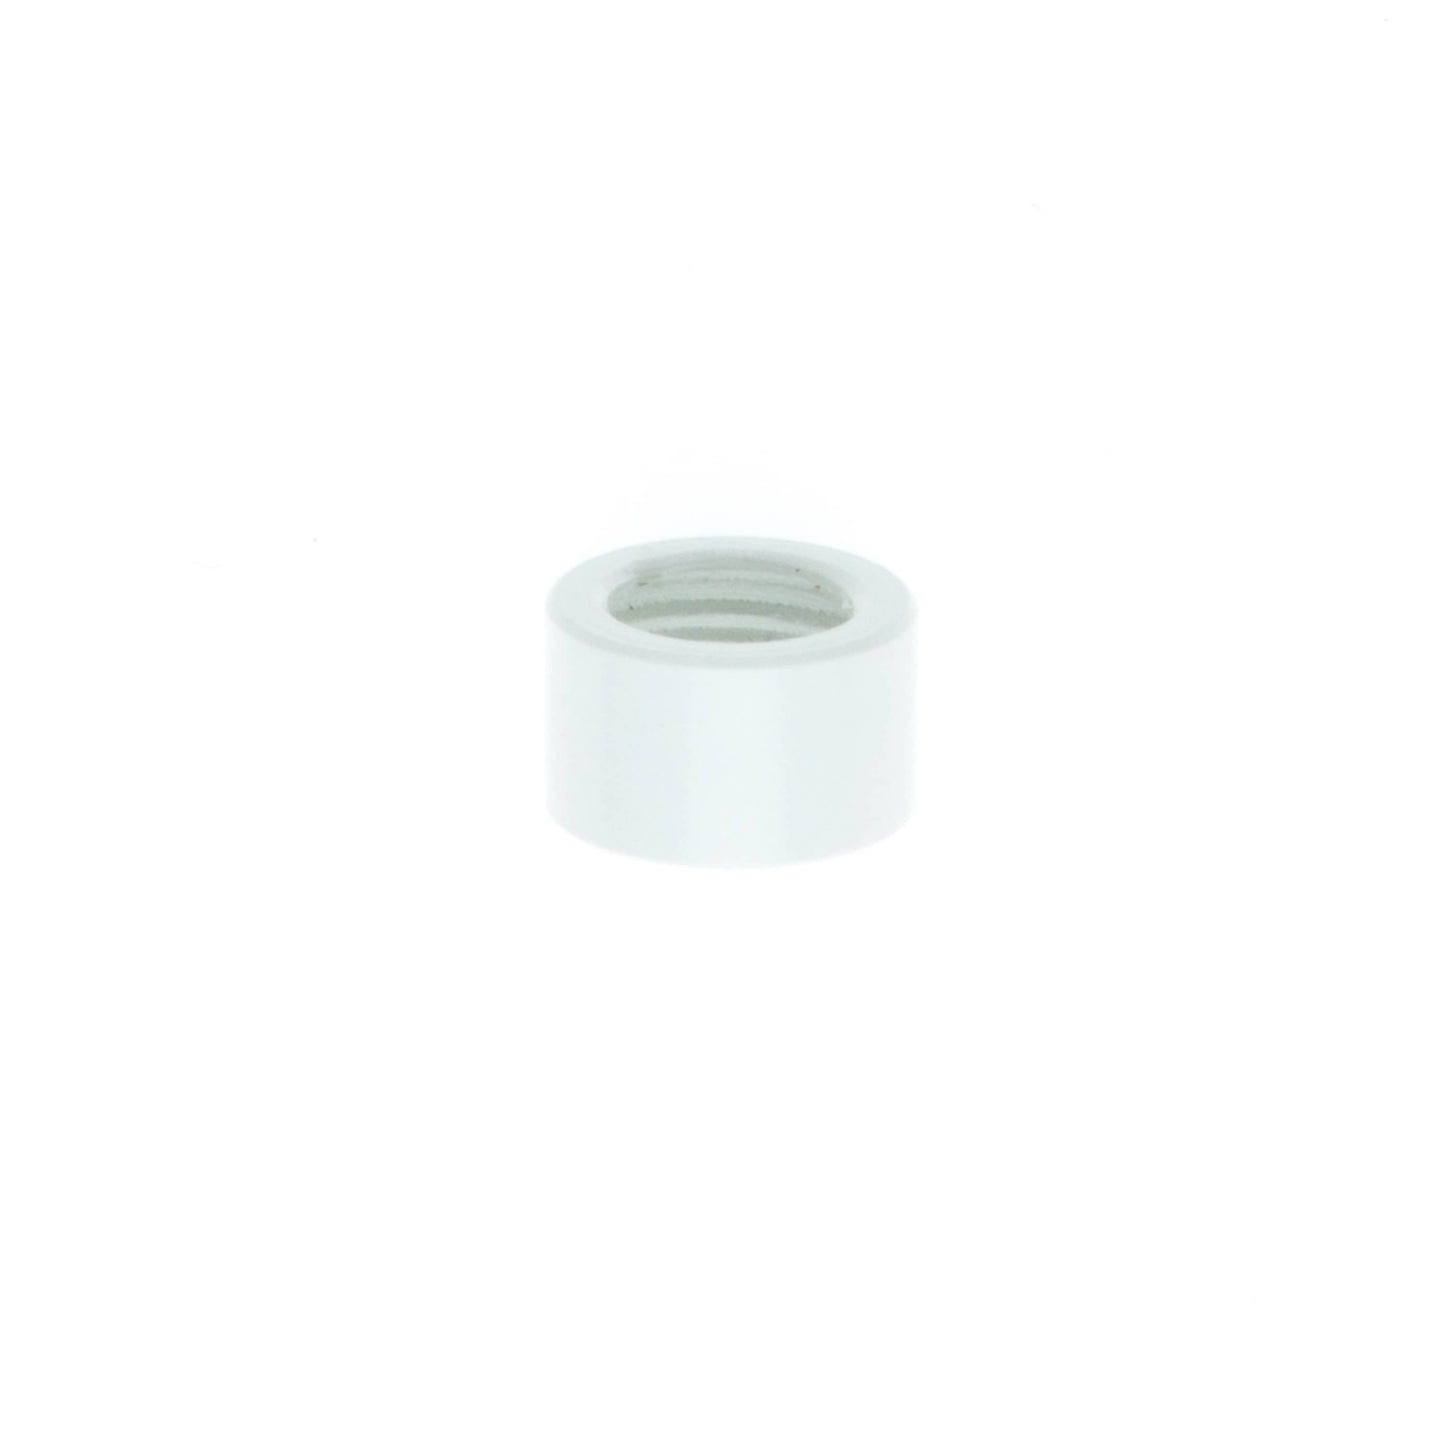 1/8 IPS Tubing/Pipe Thread Cover